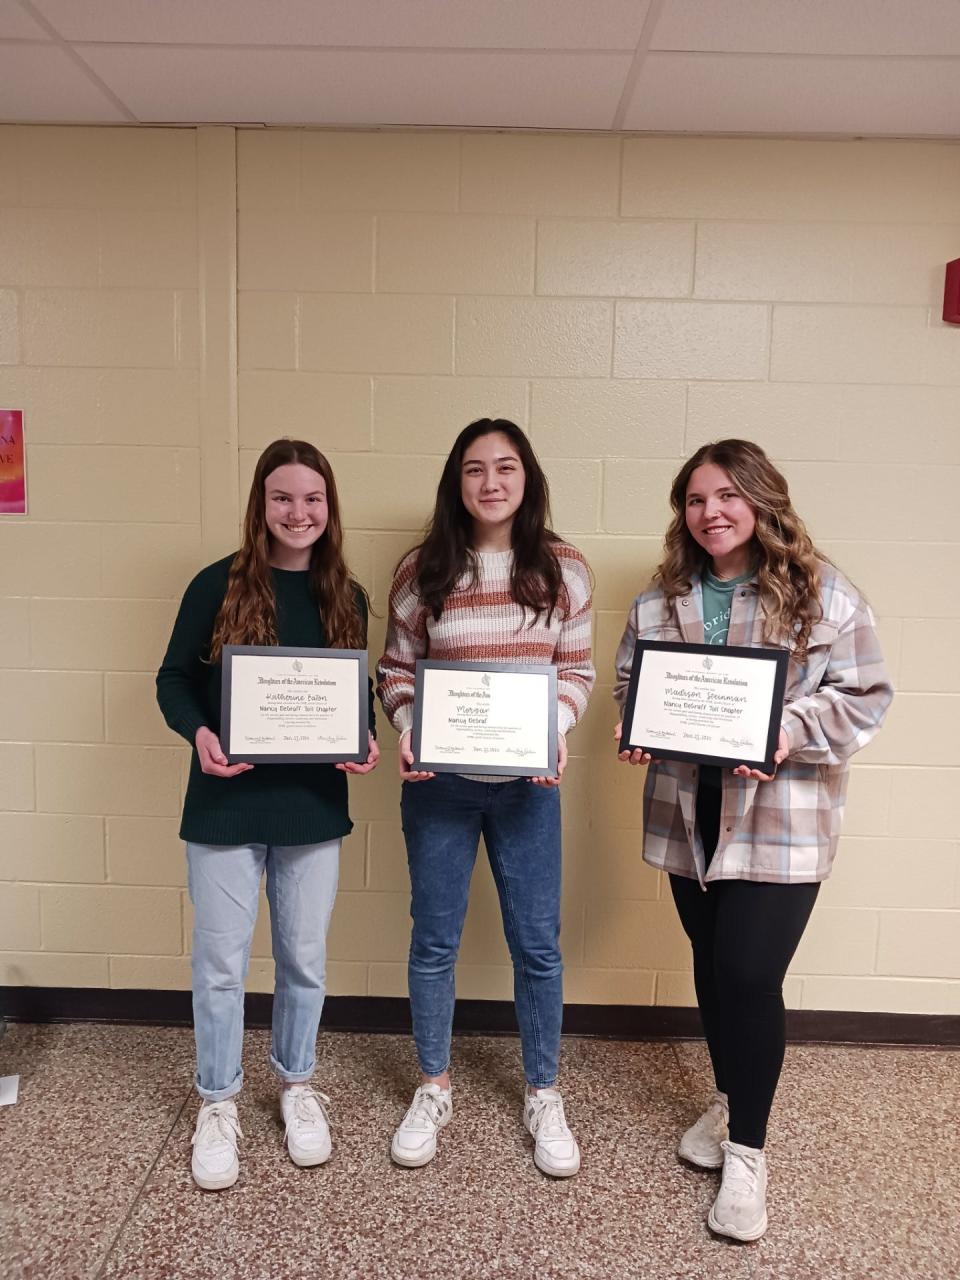 Winners of the 2024 Good Citizens program are (from left): Katherine Eaton, second place; Morgan Kay, third place; and Madison
Steinman, first place.